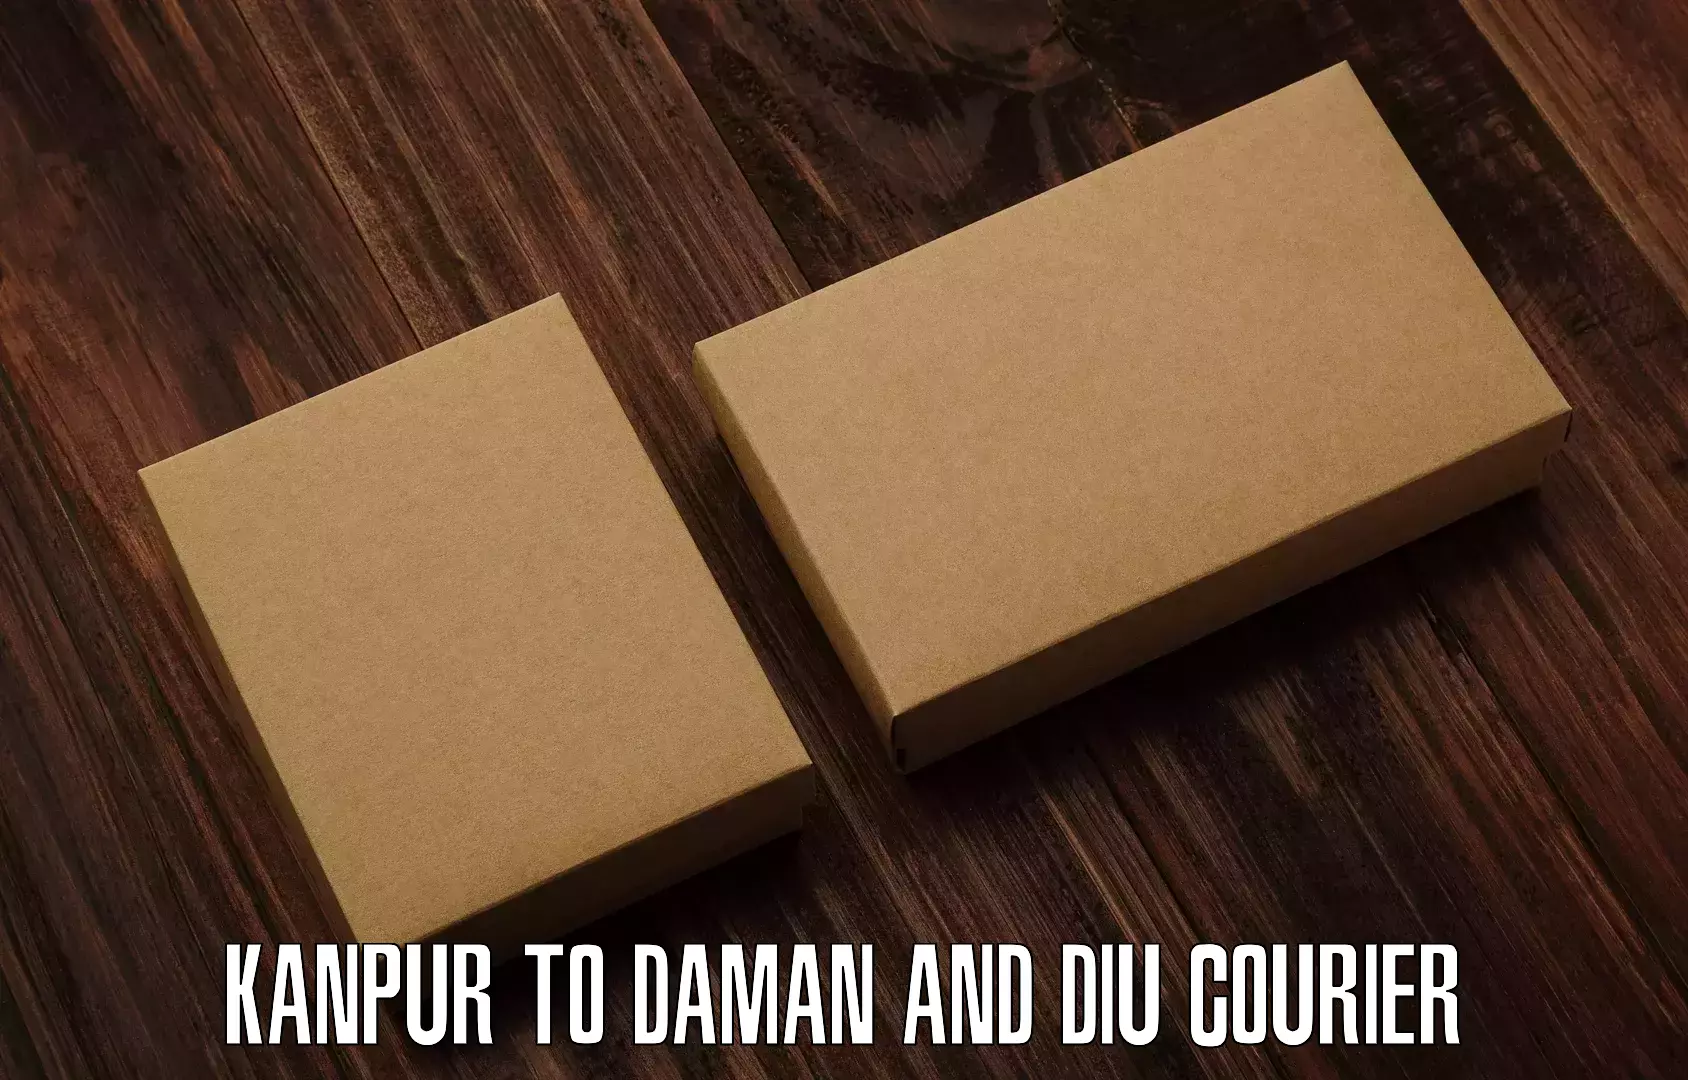 Business shipping needs Kanpur to Diu